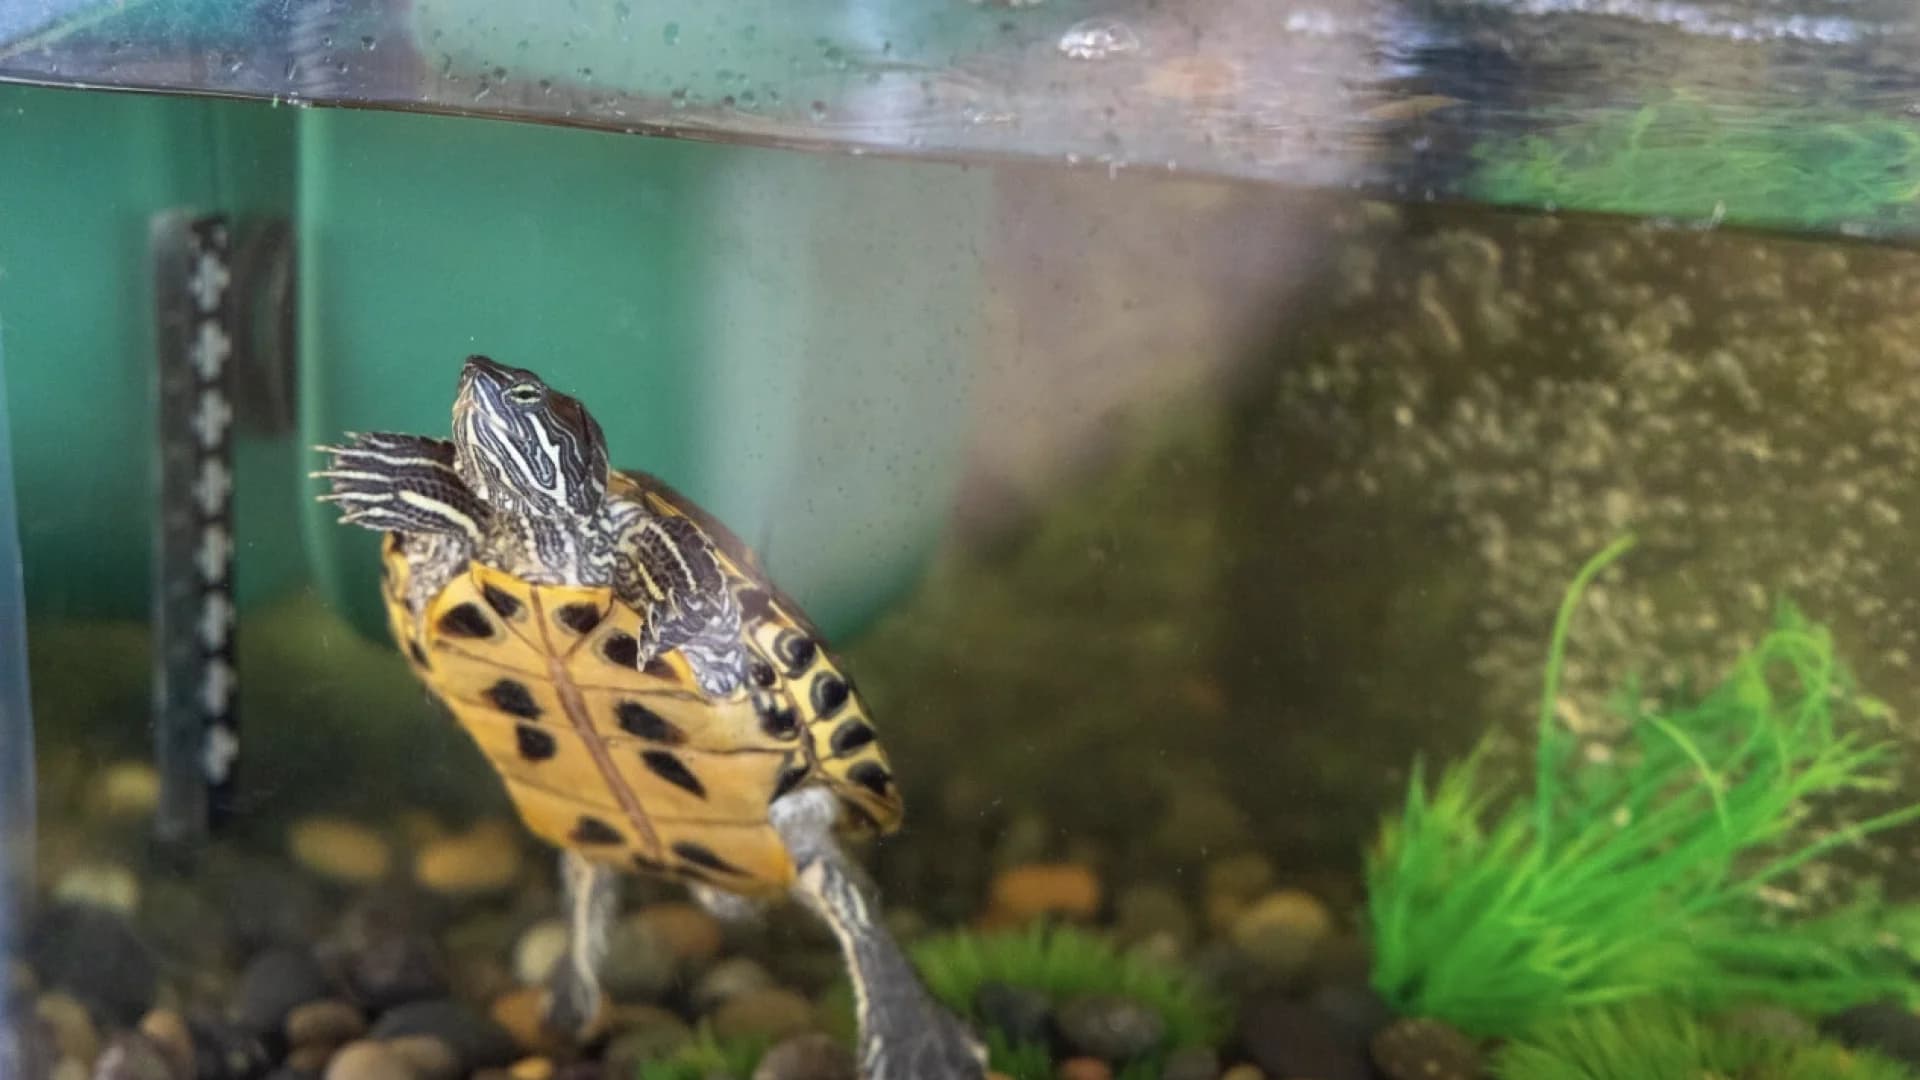 Bronx Bombers' beloved Bronxie the Turtle finds new home